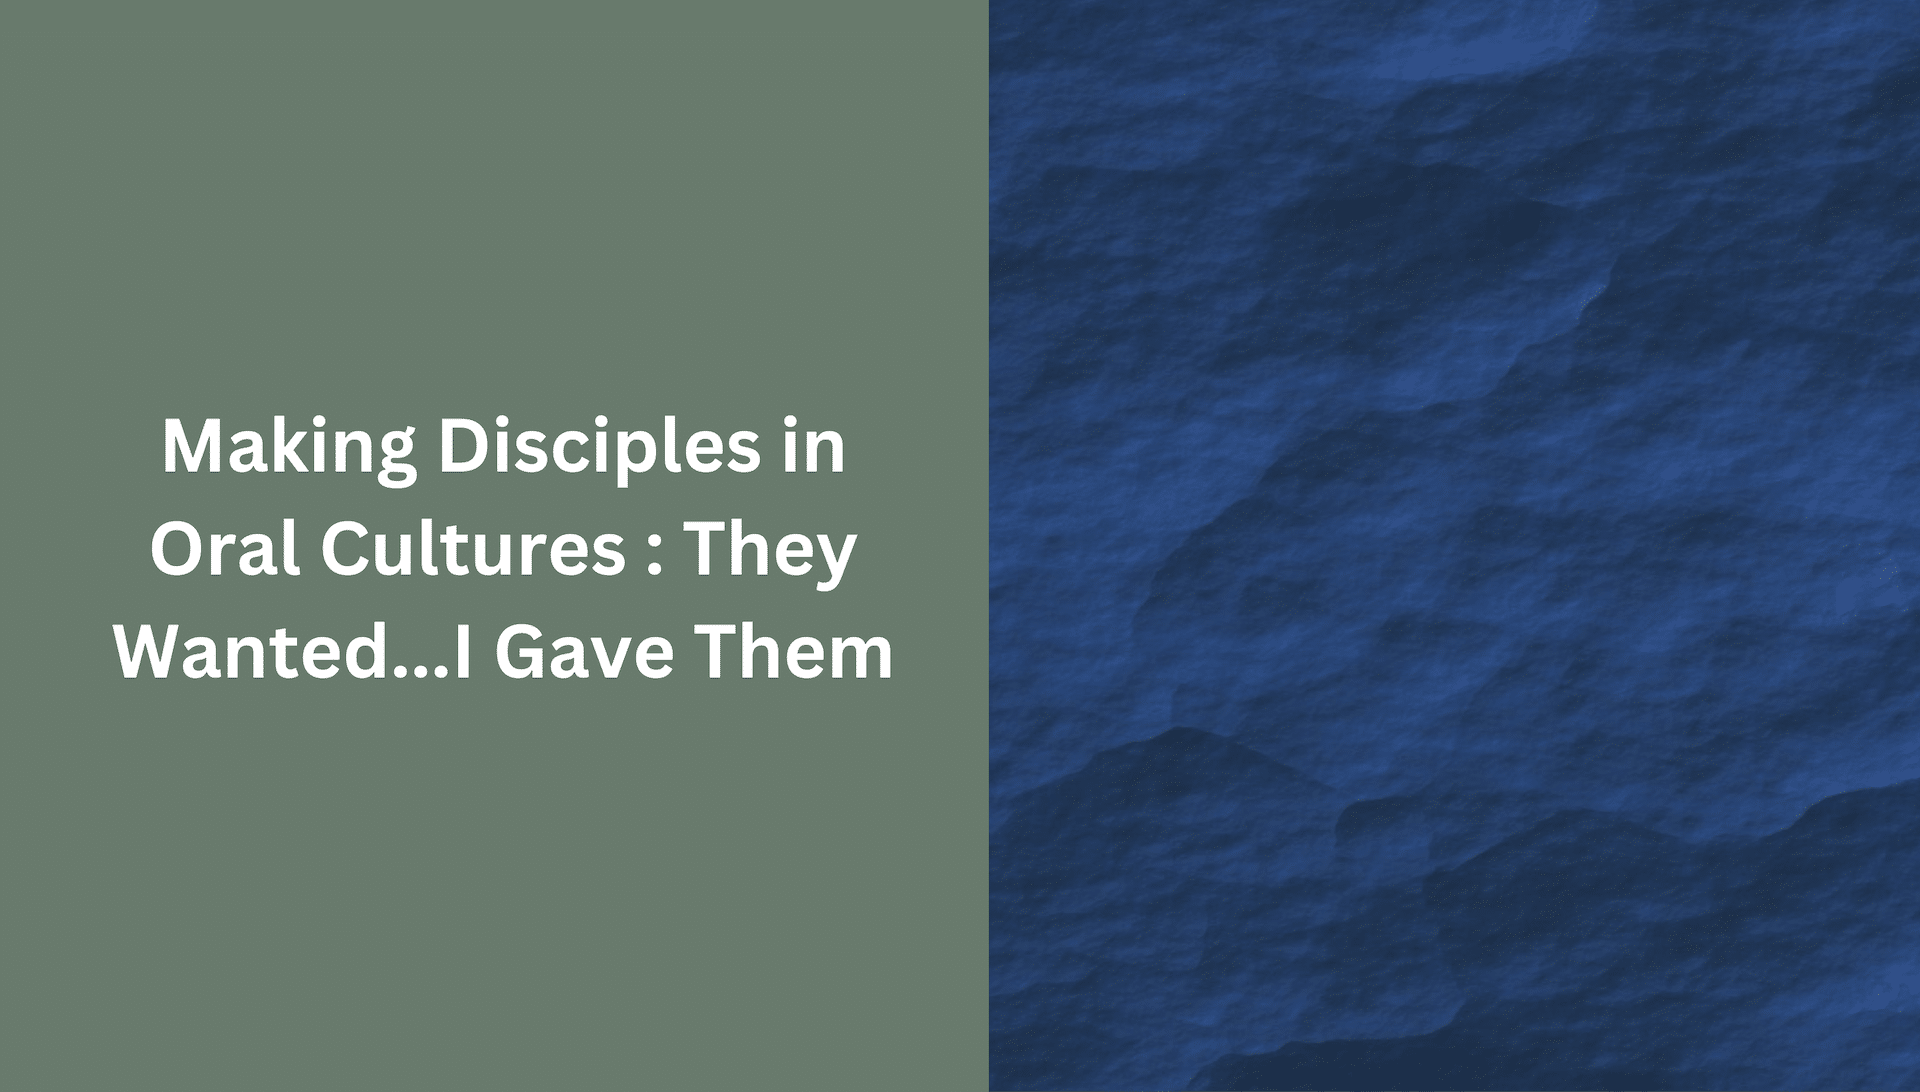 Making Disciples in Oral Cultures: They wanted . . . I gave them